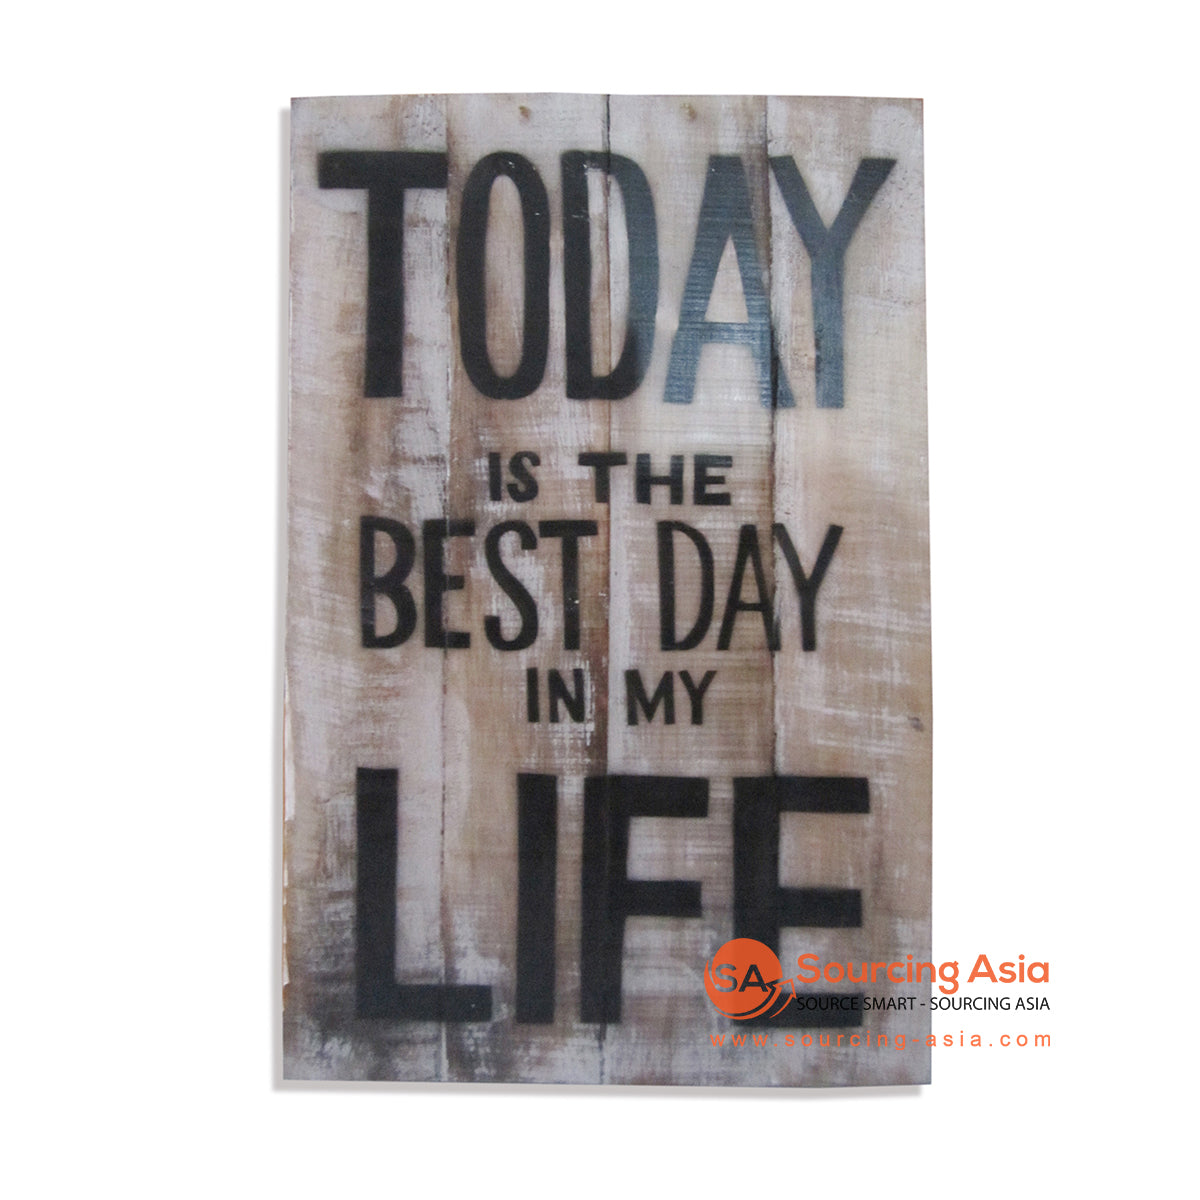 LSA07F WOODEN "TODAY IS THE BEST DAY IN MY LIFE" WALL SIGN BOARD